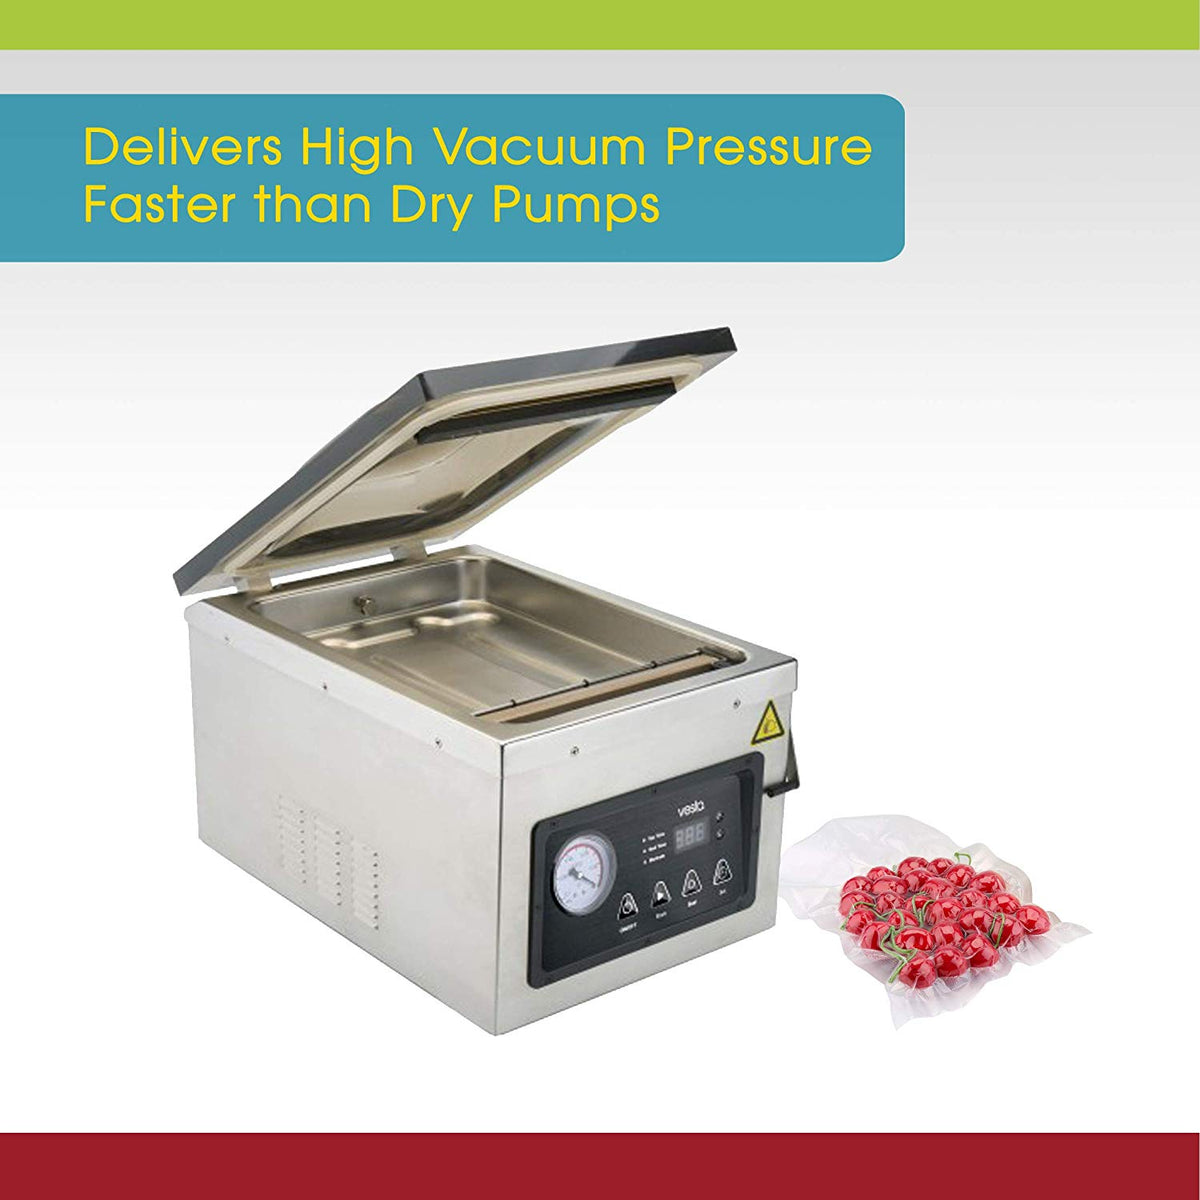 Commercial Single Chamber Vacuum Sealer with Dual 20” Seal Bar